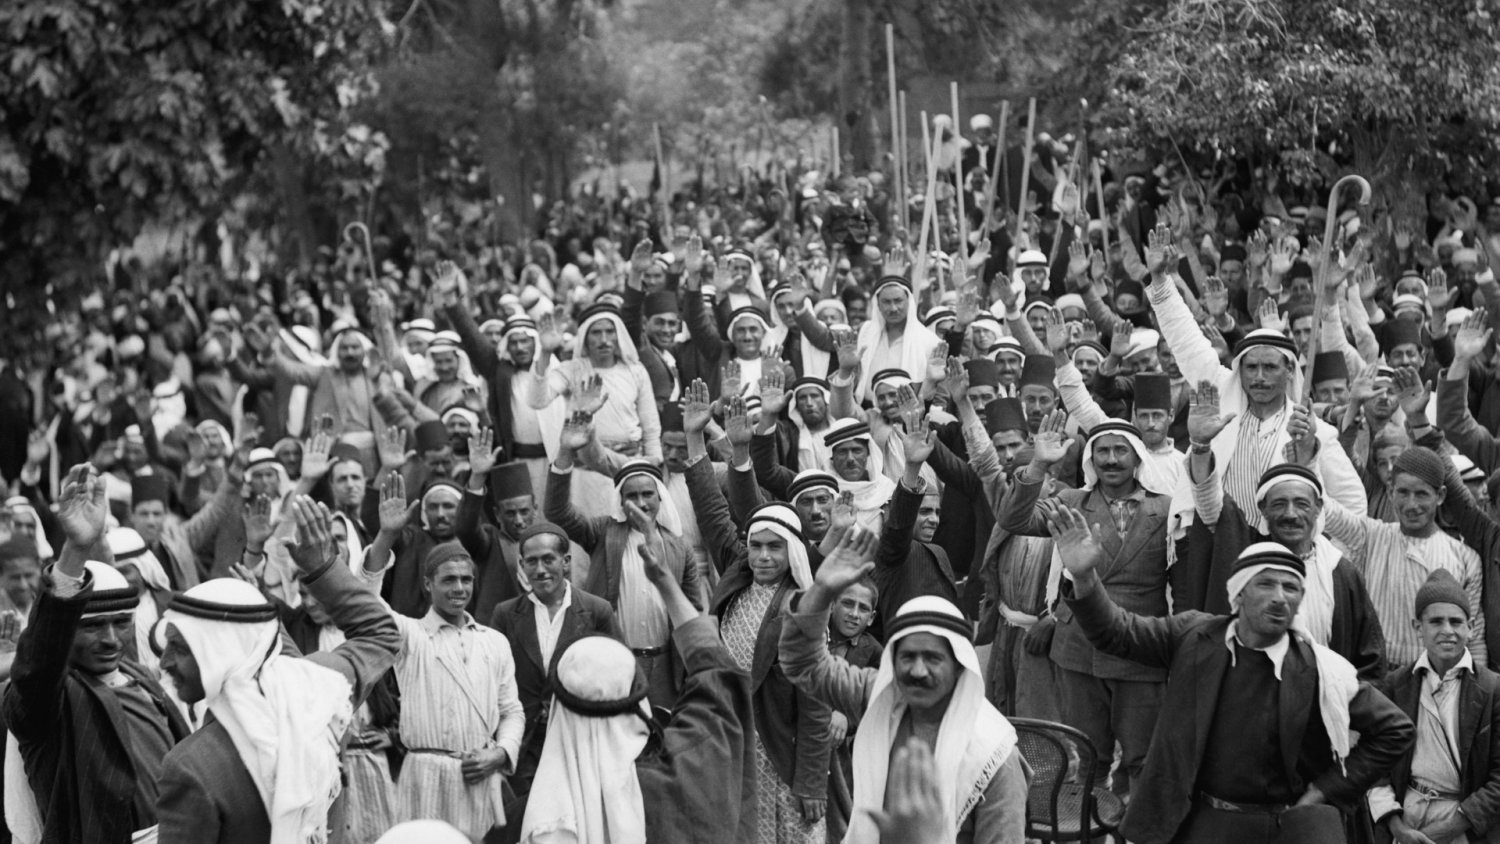 Palestinians at Abu Ghosh taking the oath of allegiance to the Arab cause and against Jewish immigration, 1936